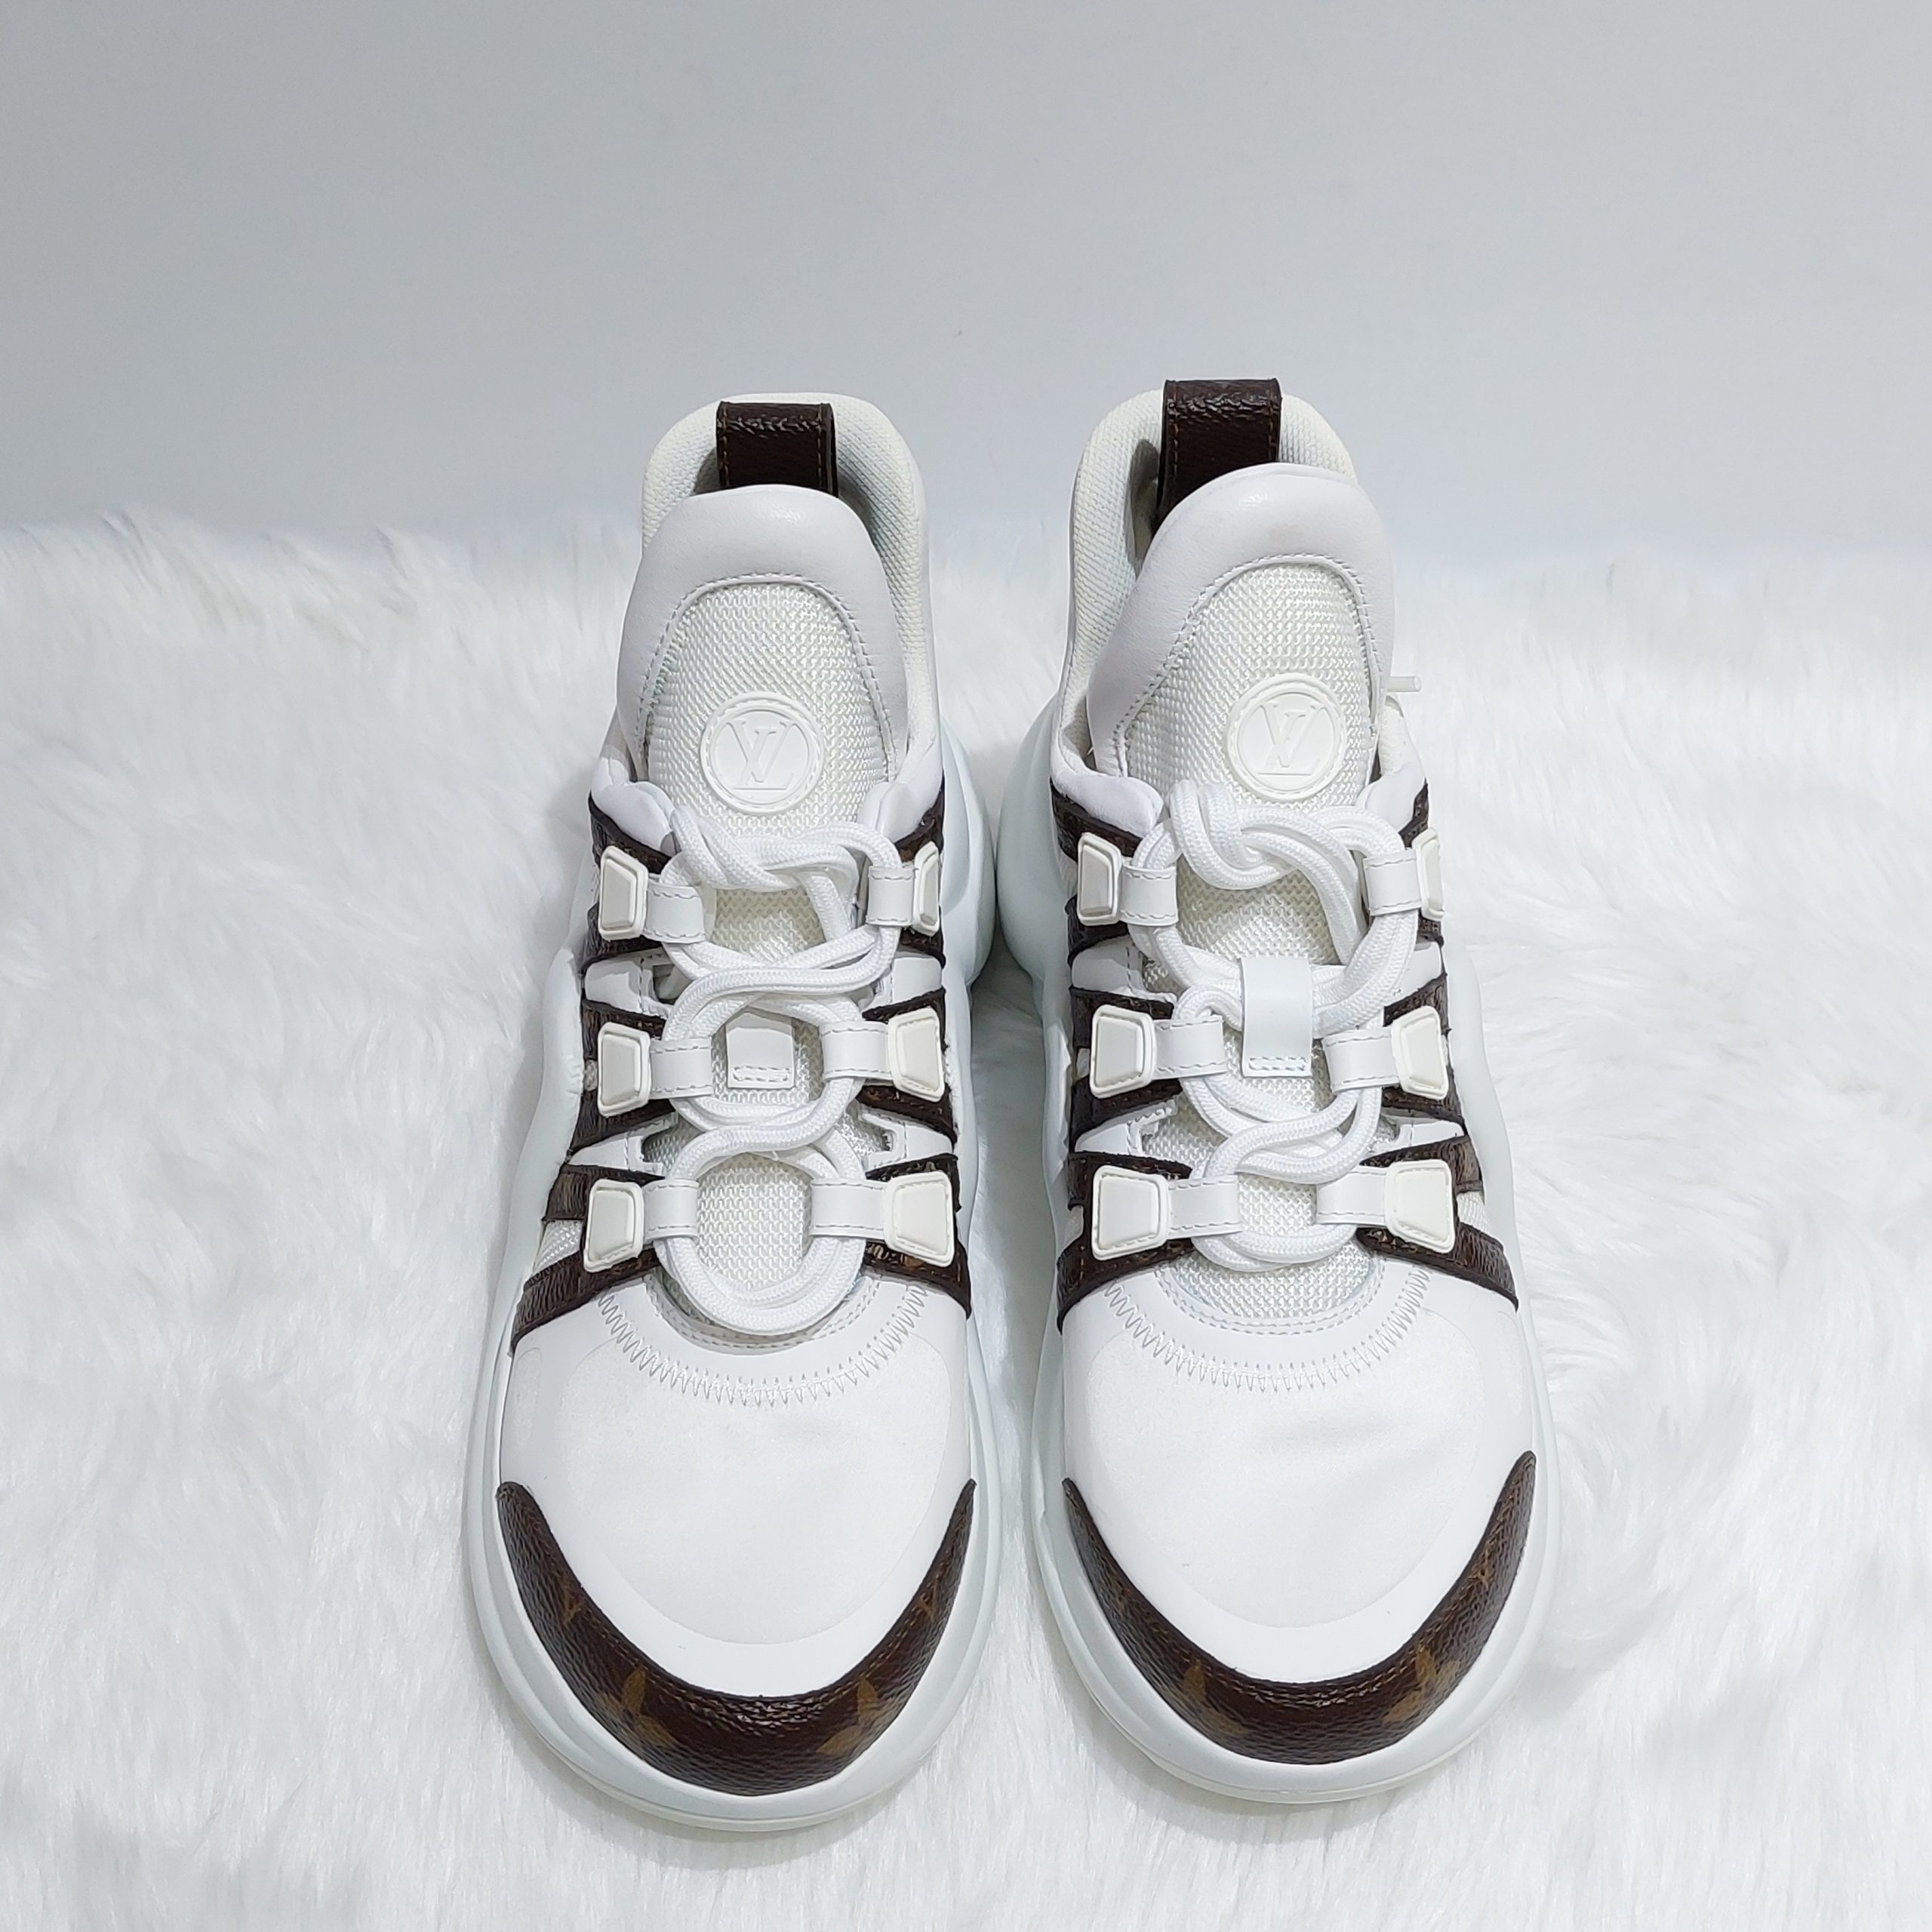 LOUIS VUITTON Arc Light Sneakers White Size 36 Women From Japan